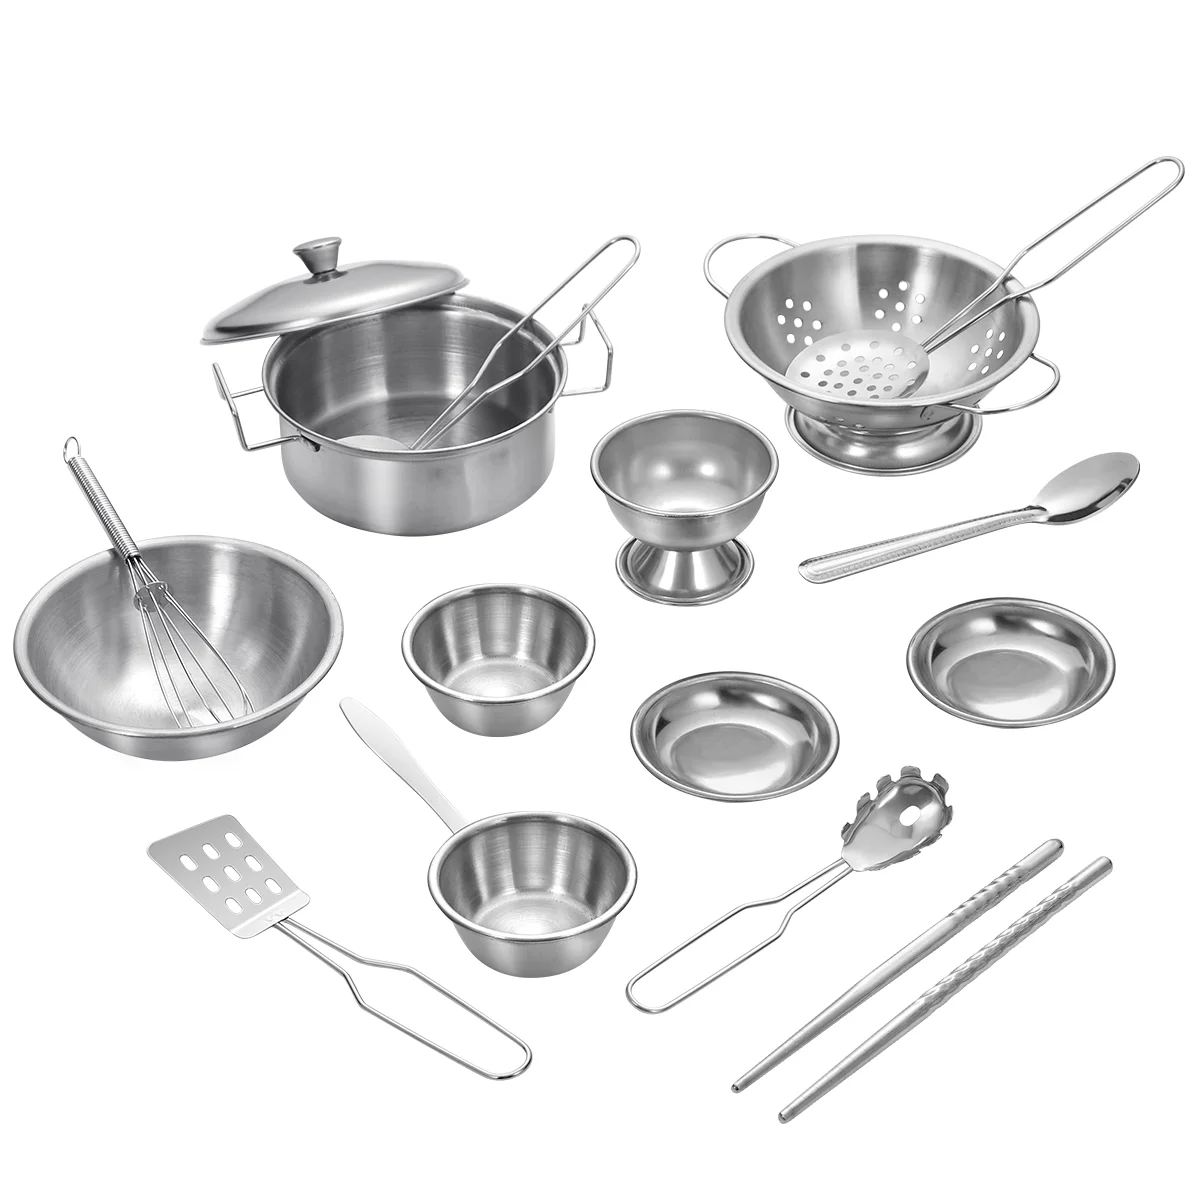 

16 Simulation Tableware Play Kitchen Pretend Cooking Cutting Pretend Play Toys Kitchen Accessories Pots and Pans Set Great